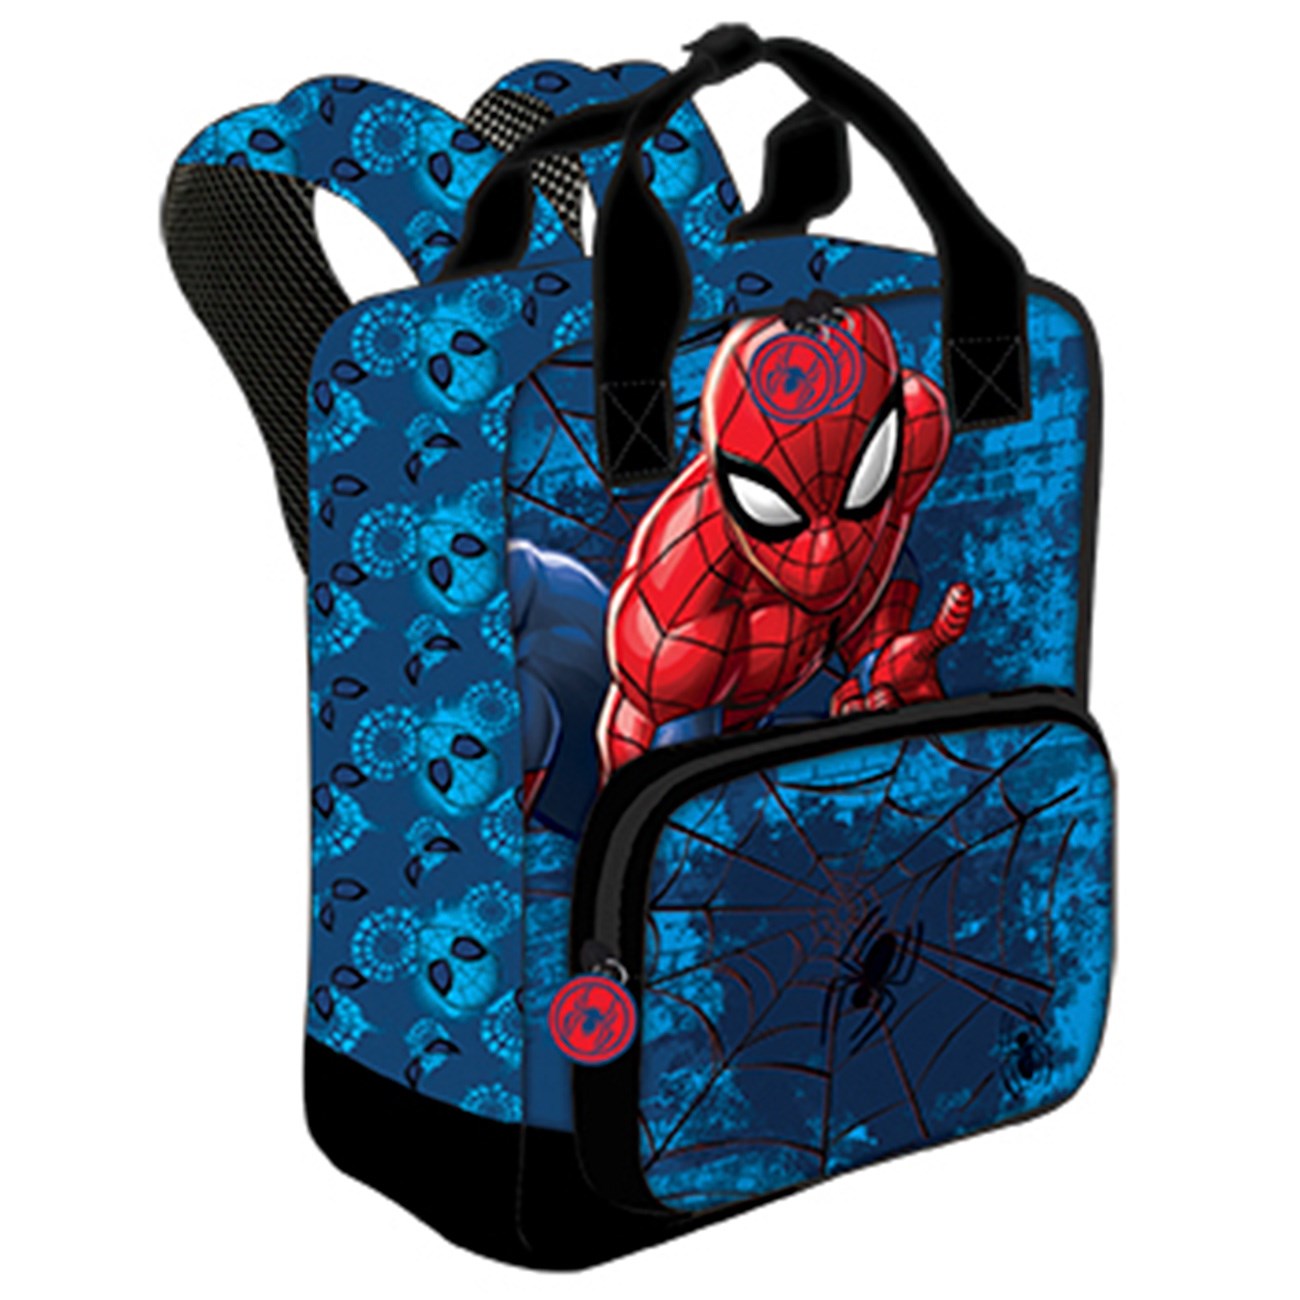 Euromic Spiderman Small Backpack